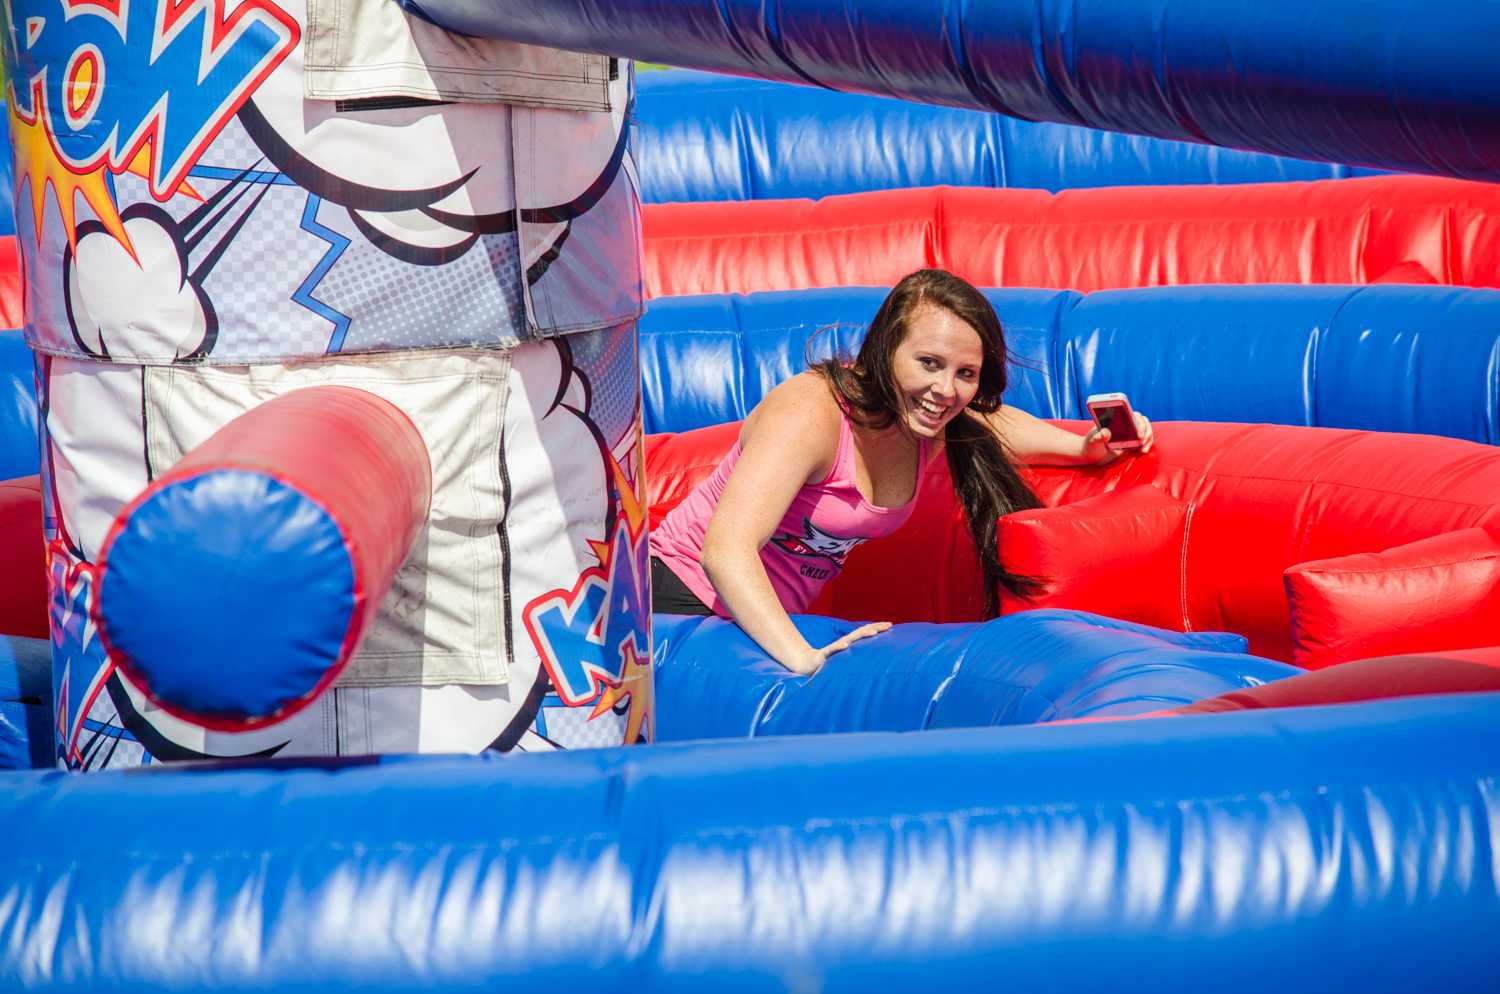 An FAU student enjoys the moving obstacle course at the Israel Independence Day Carnival, hosted by multiple groups including Owls for Israel, Hillel, ZOA, ICC, Camera, Hasbara, Stand With Us, and Student Government’s Multicultural  Programing. 